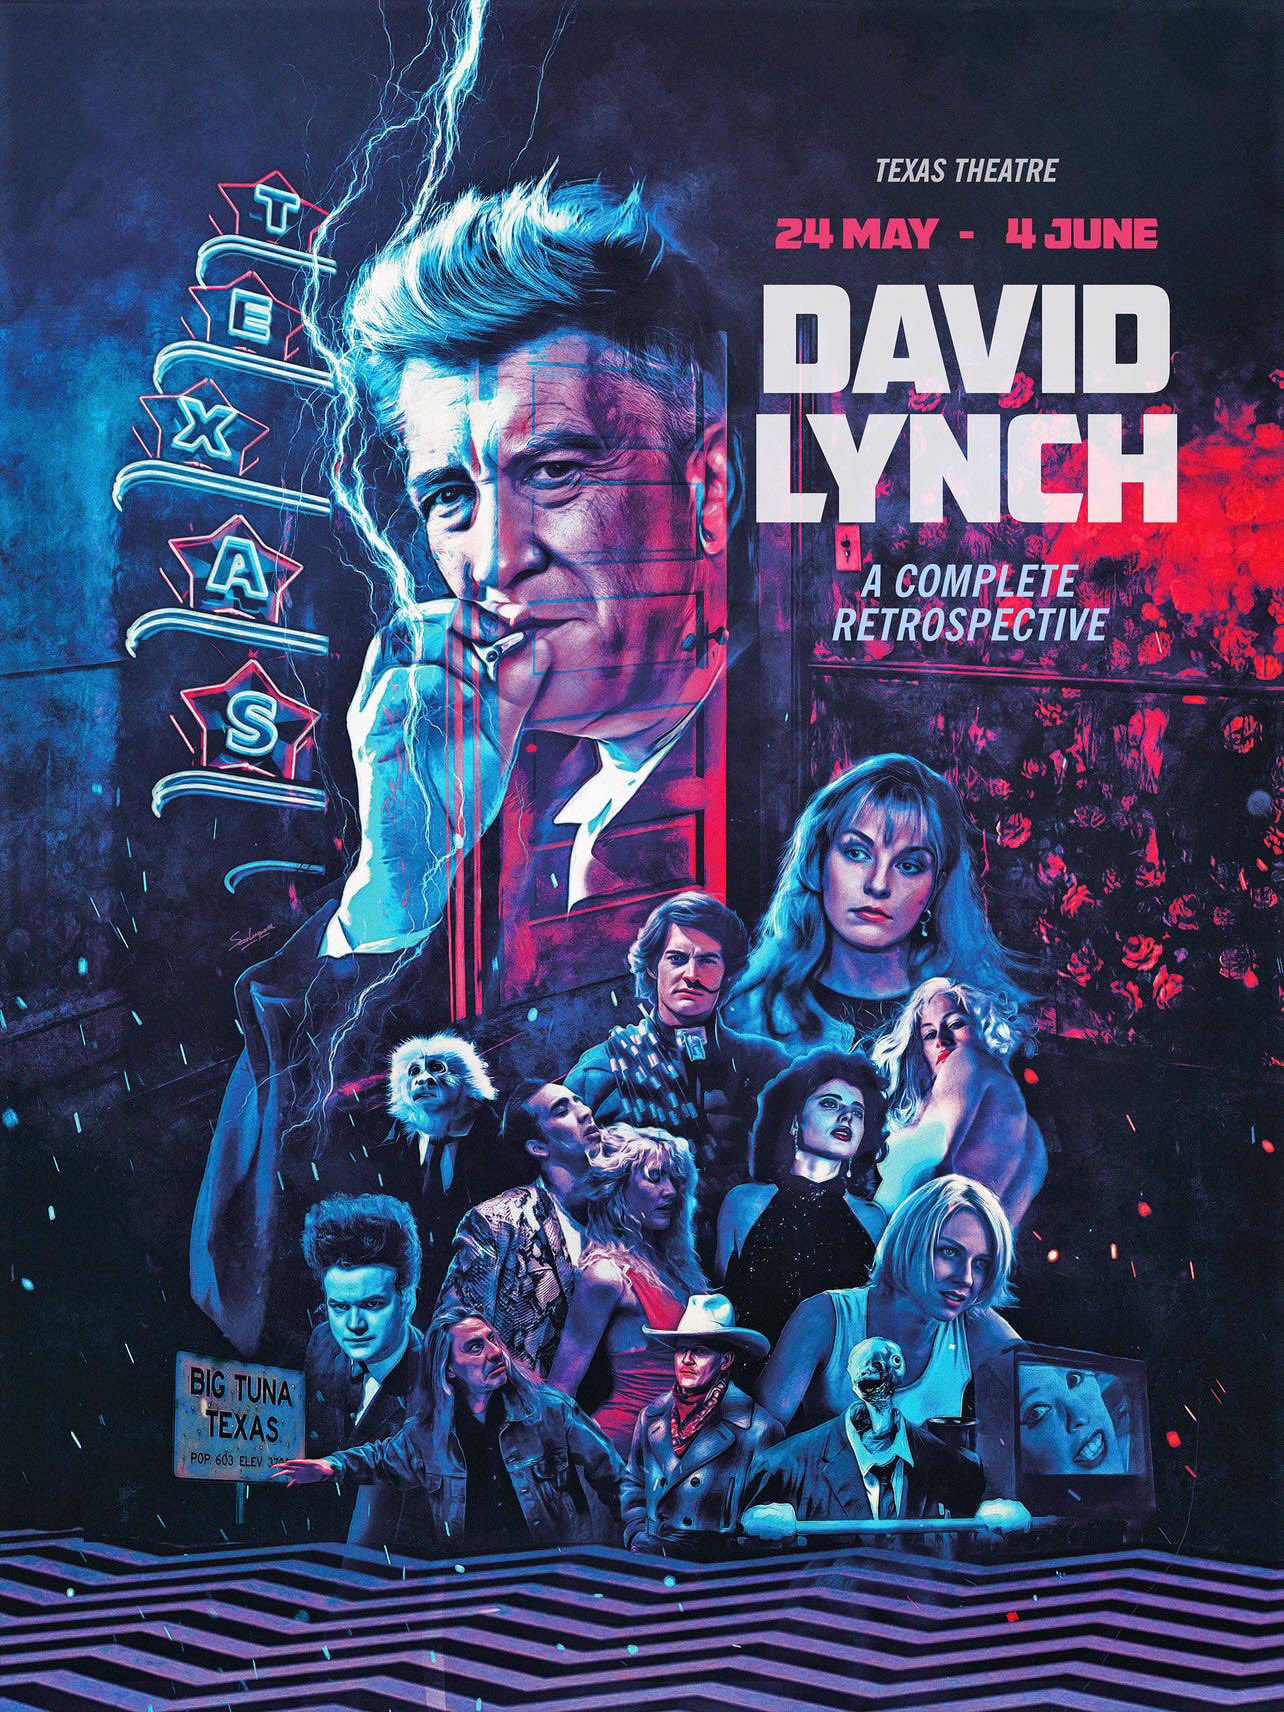 Daniel Knox on X: "DAVID LYNCH: A Complete Retrospective comes to Dallas at  the @TexasTheatre May 24-June 4 for 12 comprehensive days of #DavidLynch  Guests, music, surprises, and interviews by @BlueRoseMag1 Beautiful